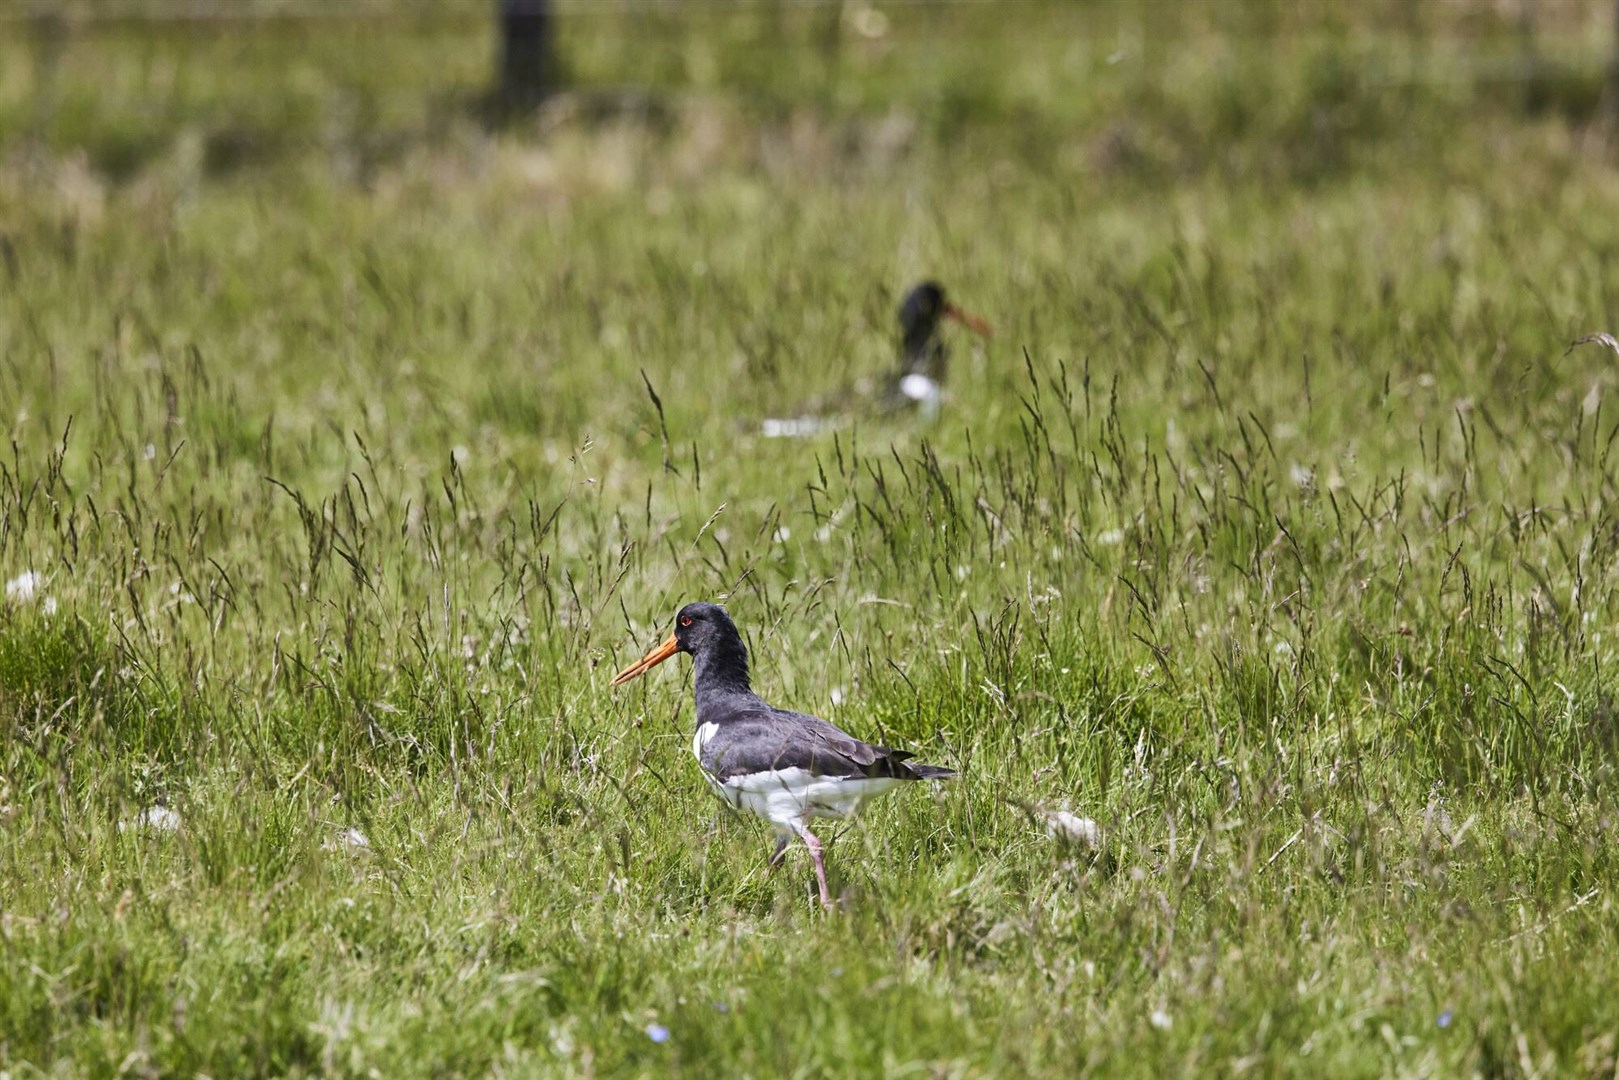 Adult oyster catchers